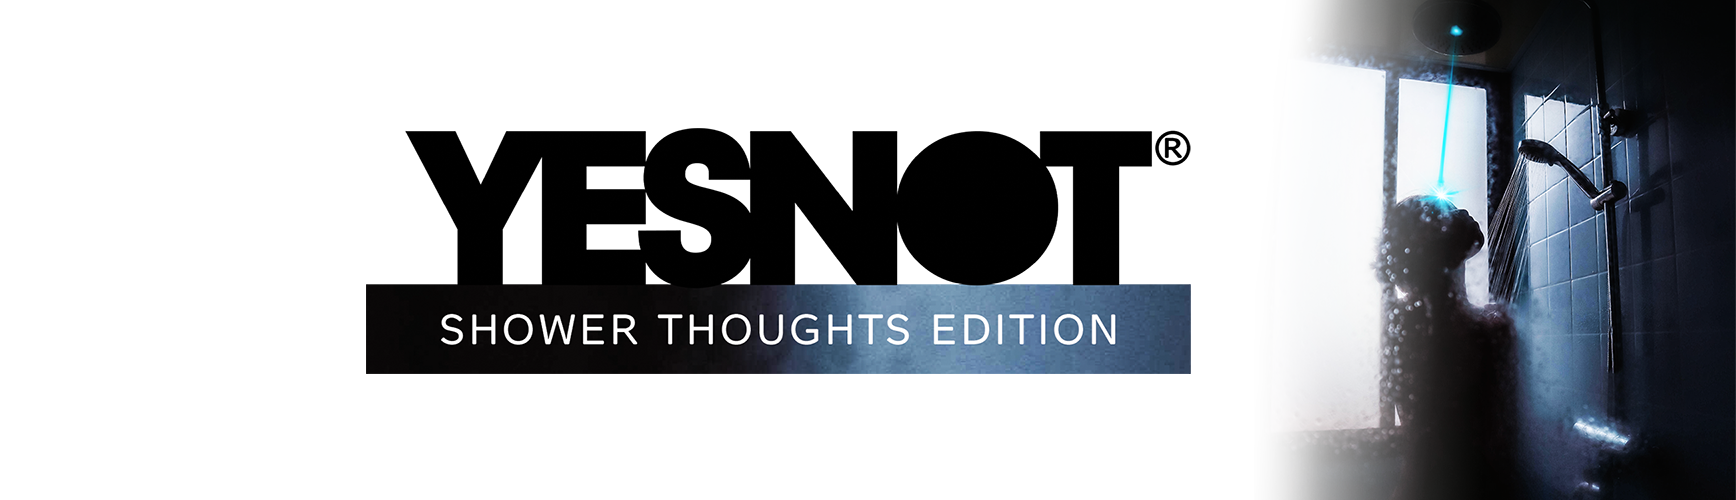 BANNER SHOWER THOUGHTS corrected 1736x500